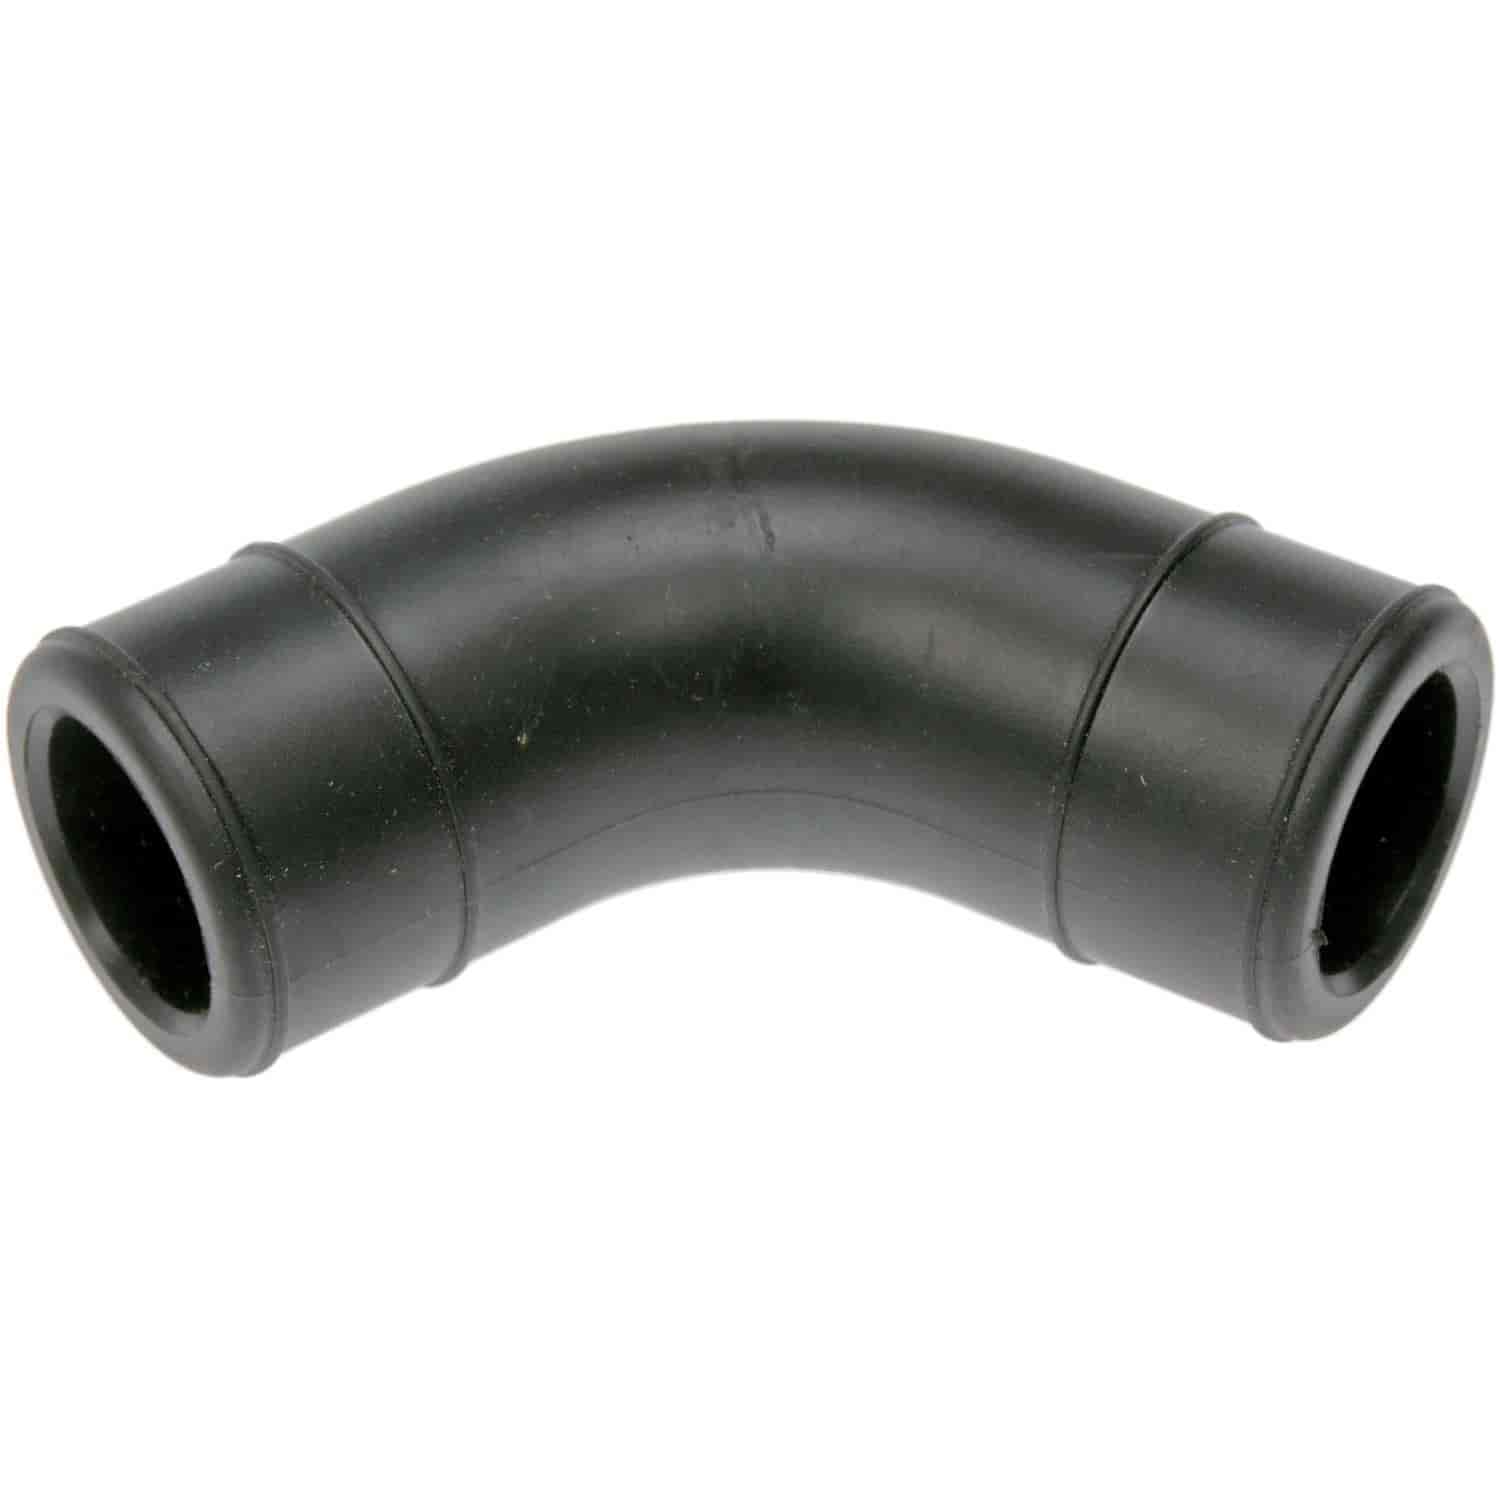 Breather Elbow - Connects the hard vent tube to the intake hose